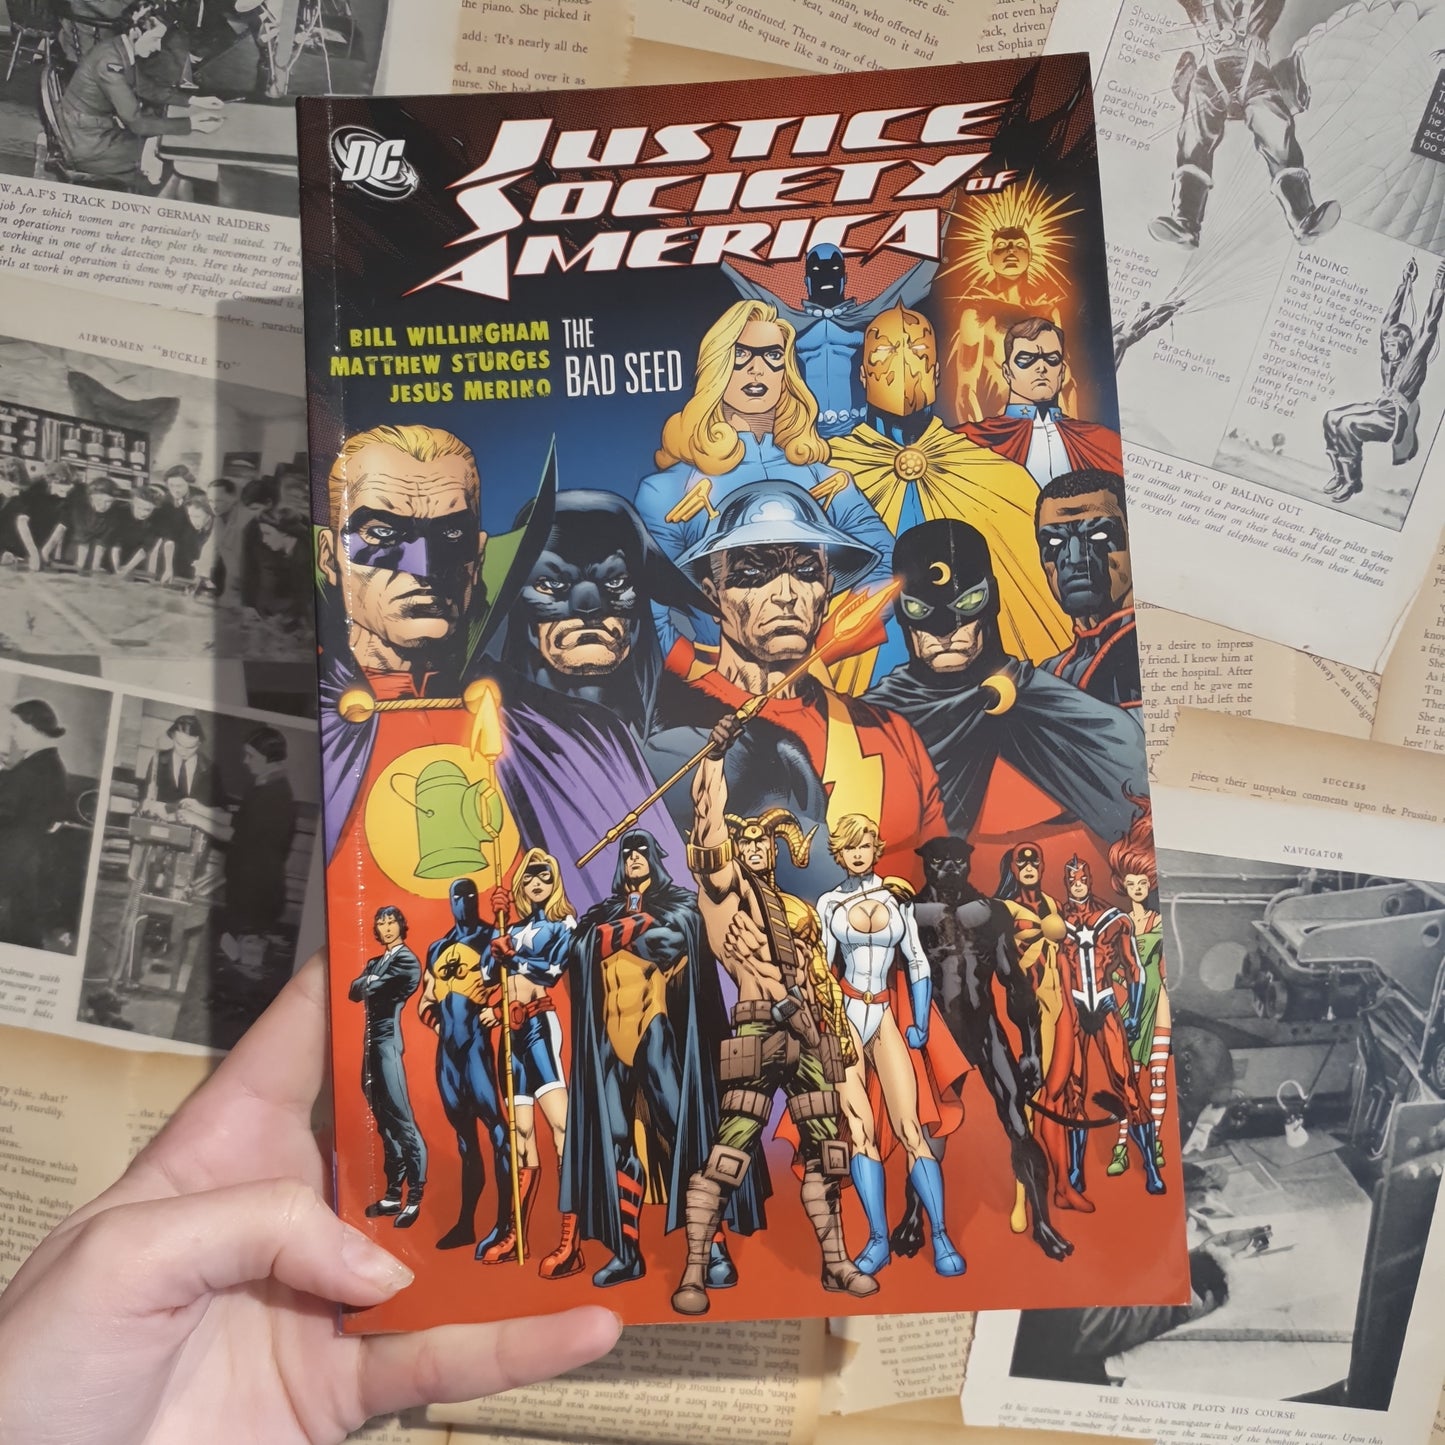 Justice Society of America: The Bad Seed by Willingham, Sturges & Merino (2009)